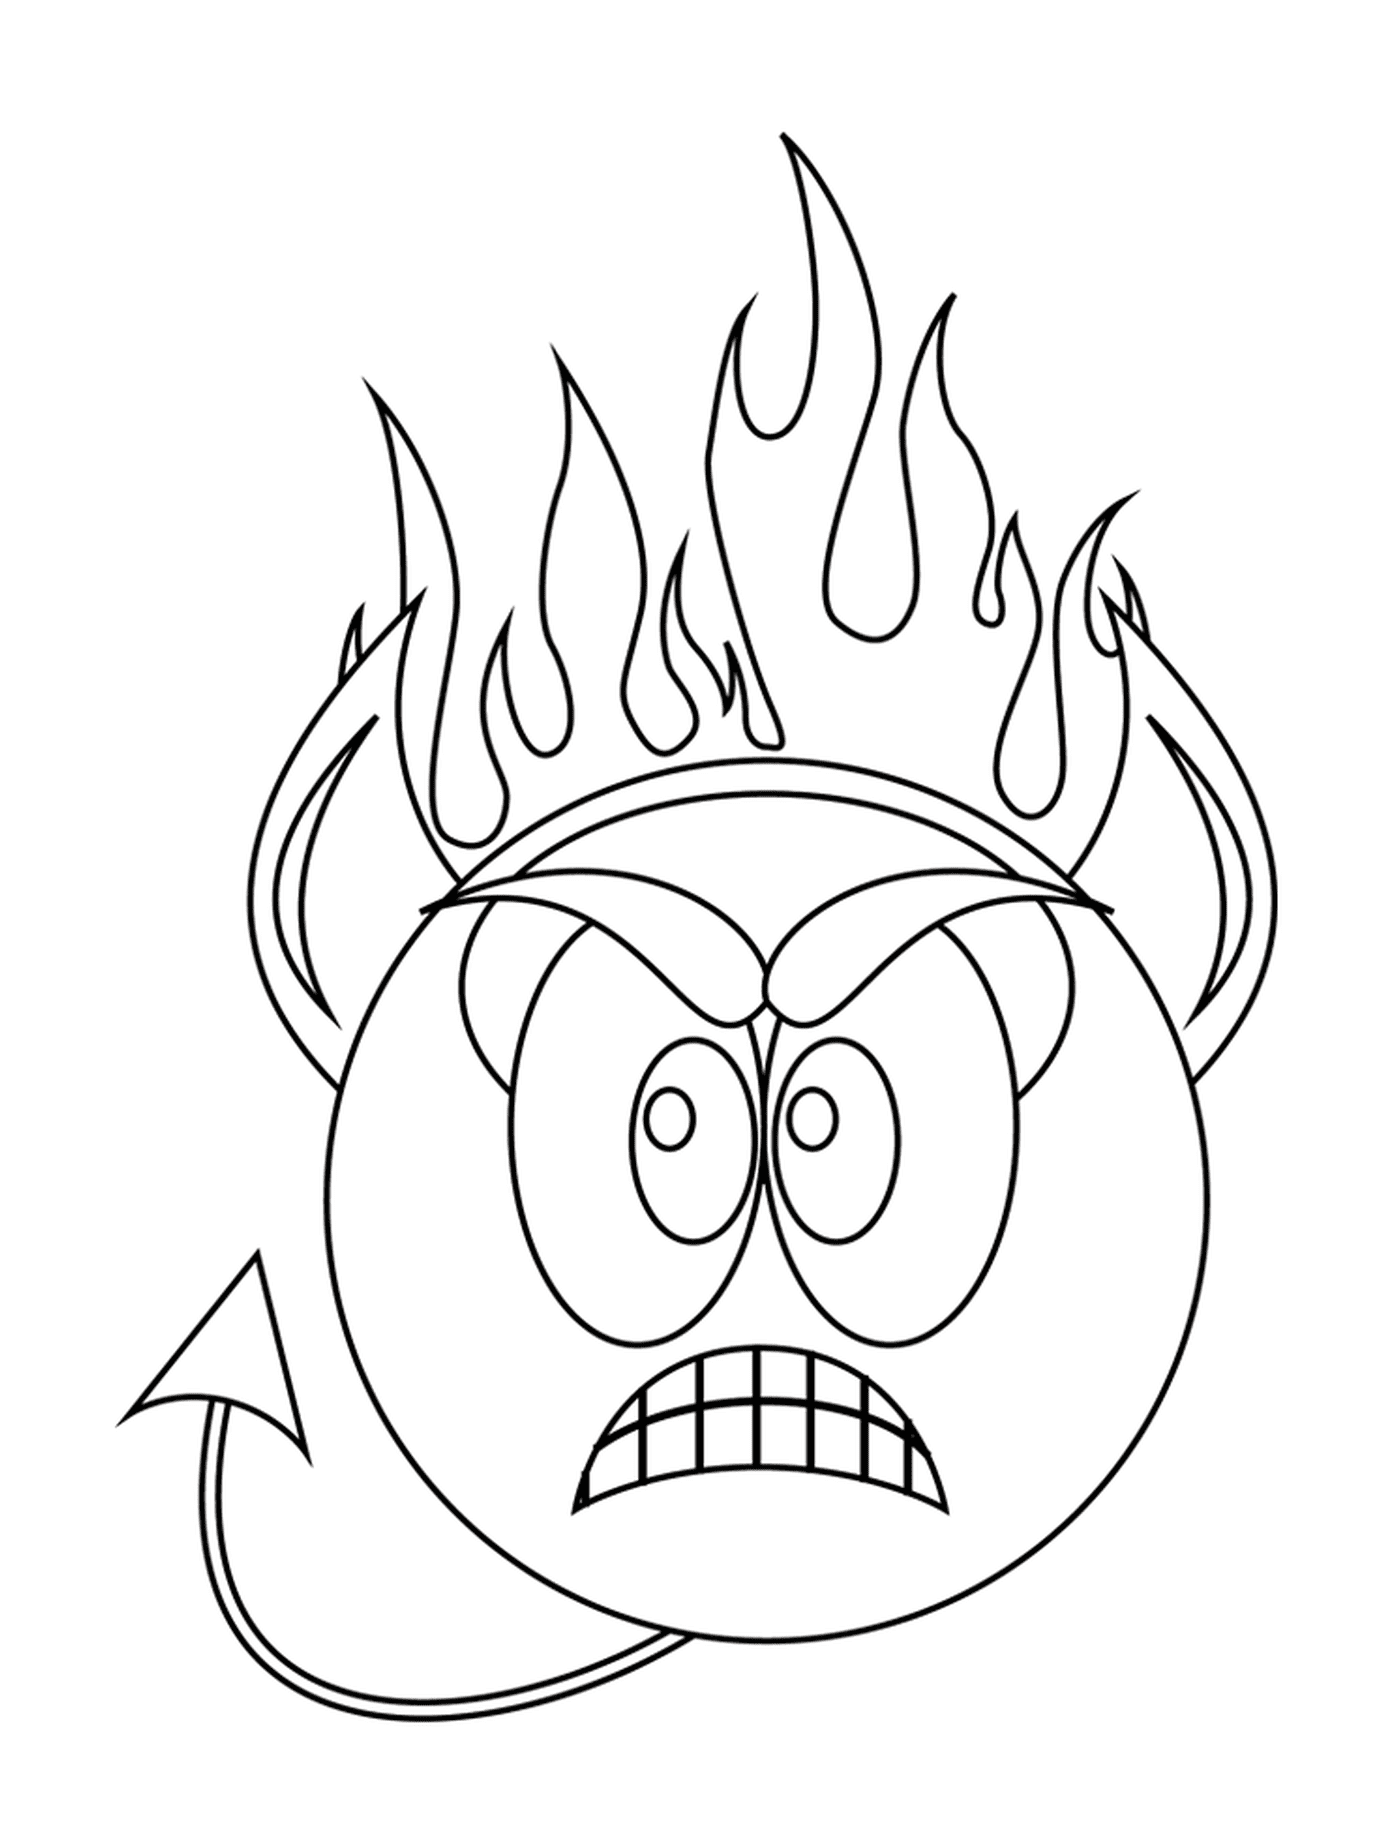  Face angry flames 